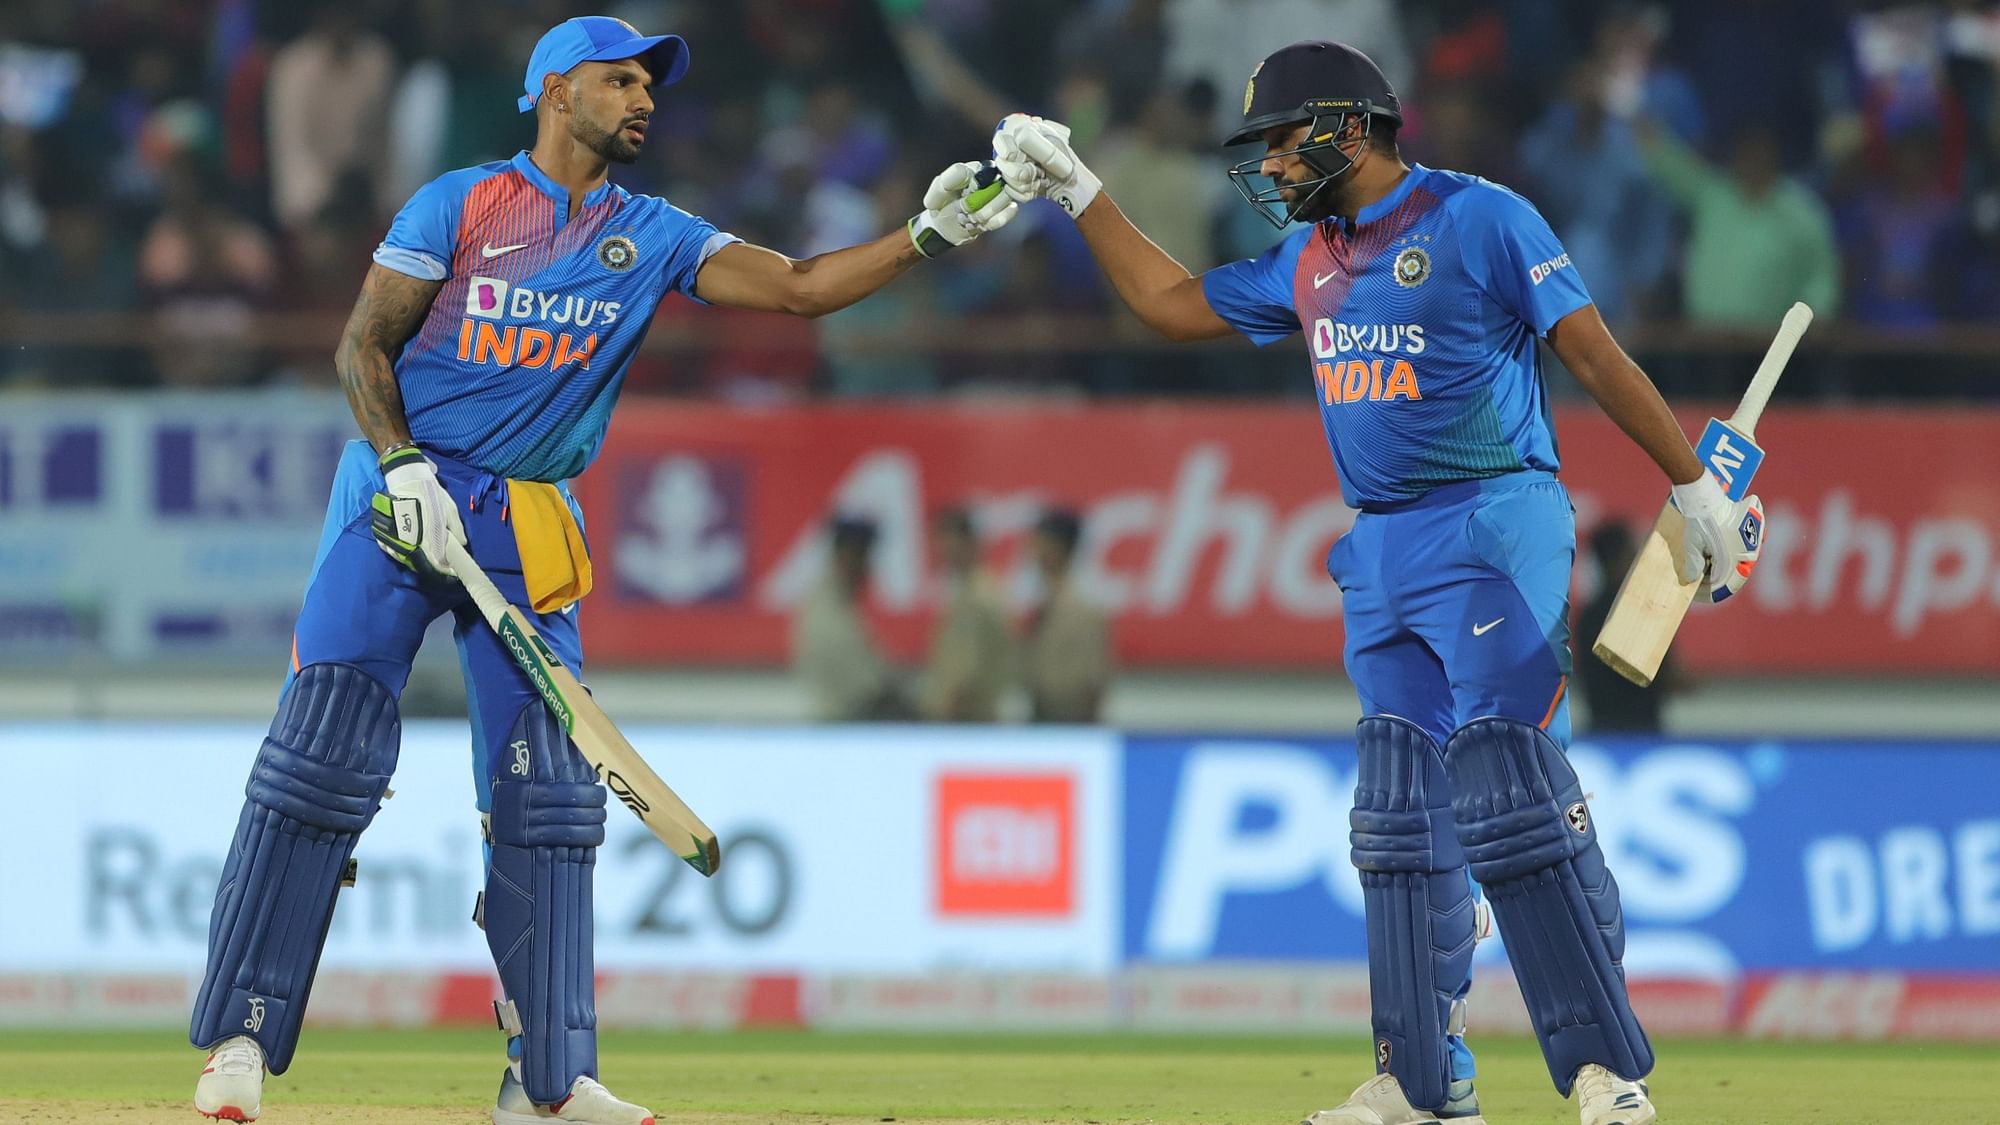 India defeated Bangladesh by eight wickets in the second T20 in Rajkot.